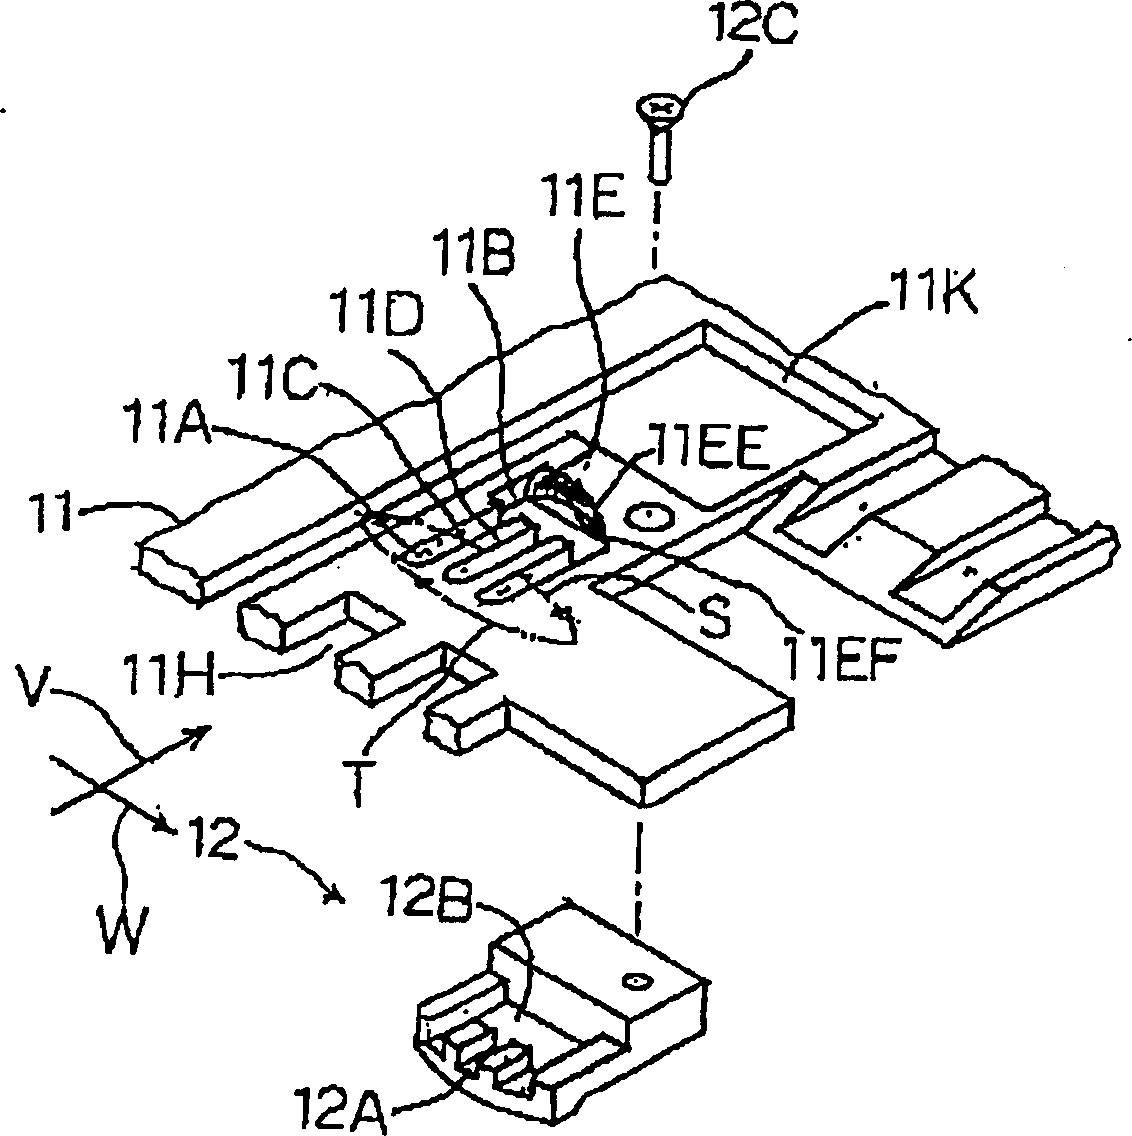 Loop forming device for ring stitch sewing machine